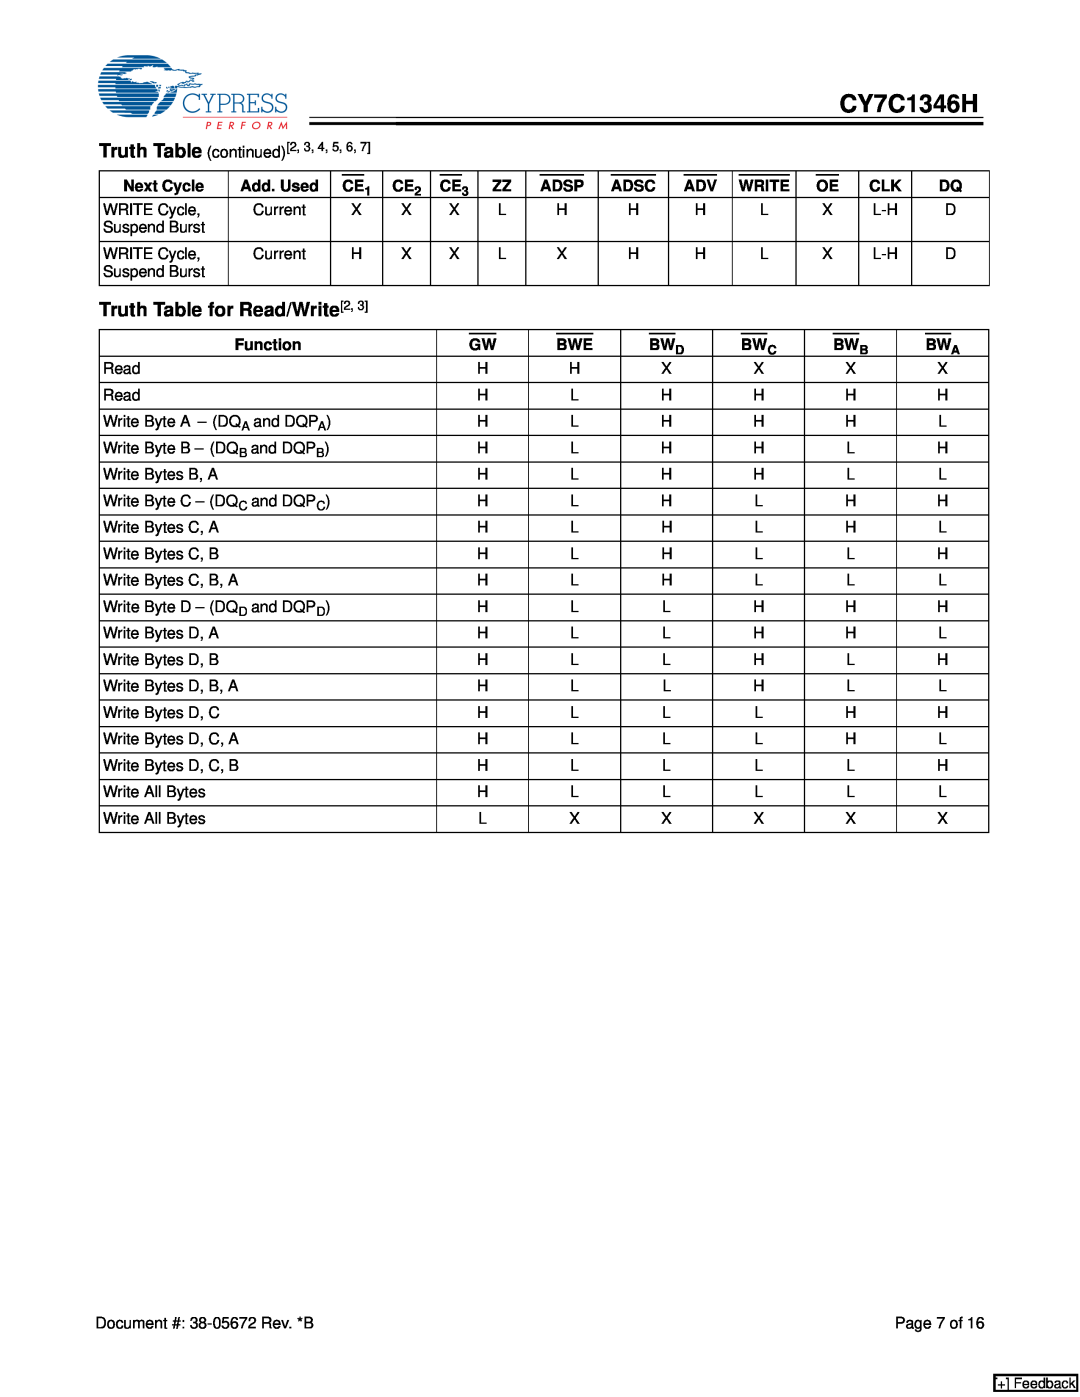 Cypress CY7C1346H manual Truth Table for Read/Write2, Truth Table continued2, 3, 4, 5, 6 